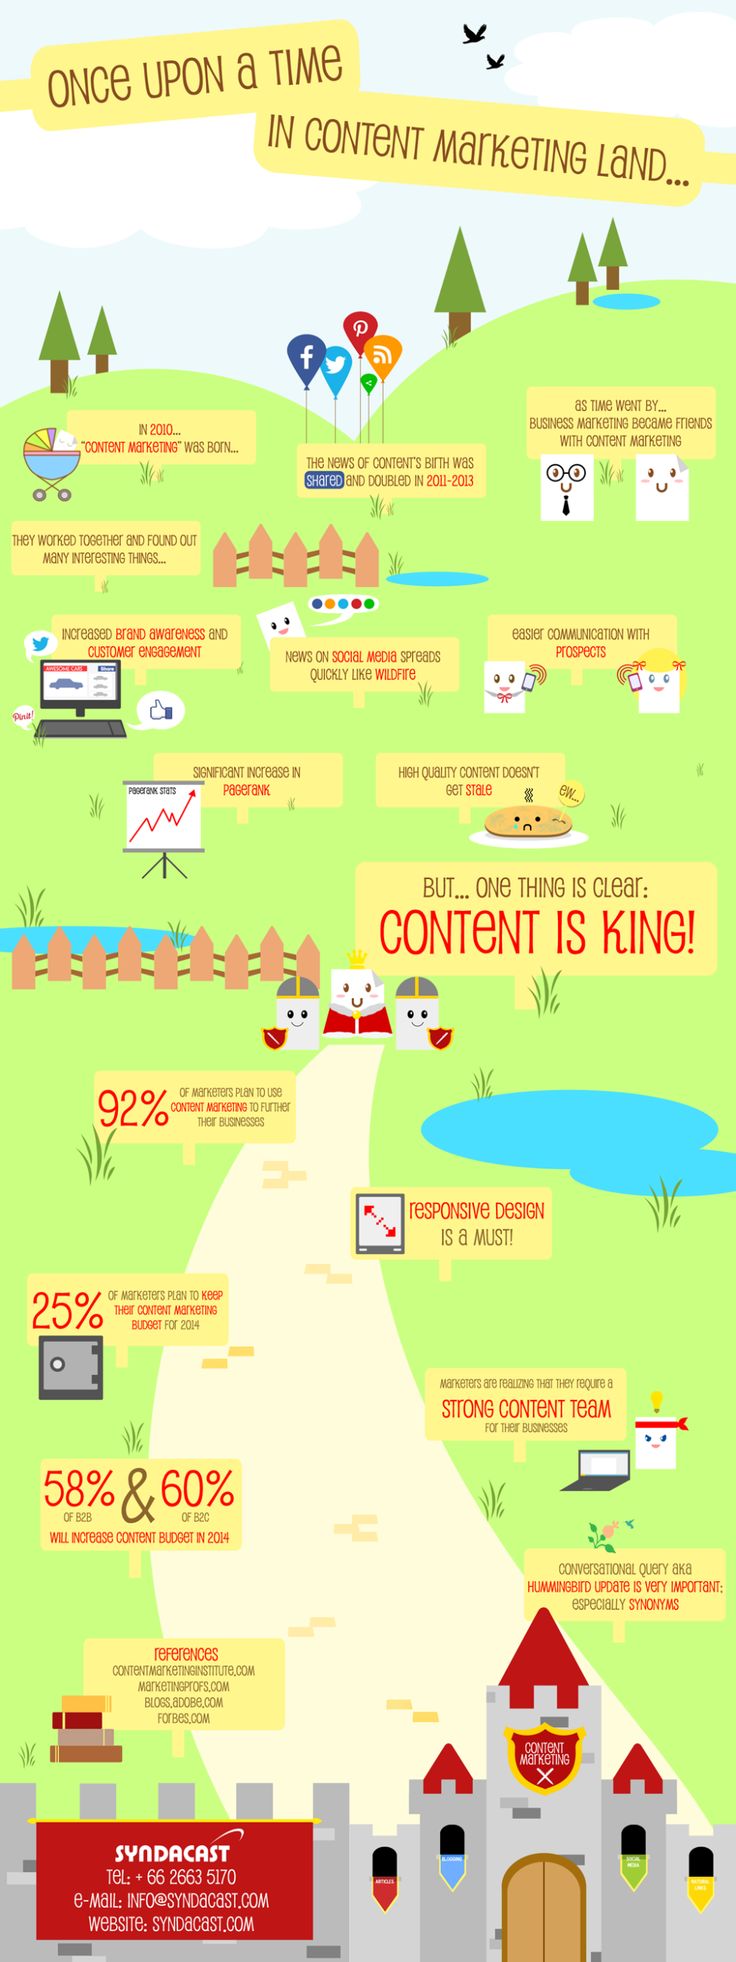 Advertising-Infographics-Im-not-sure-I-would-say-content-marketing-was-born-in-2010-but-its-clear-th Advertising Infographics : Once upon a time in Content Marketing Land ... #infographic